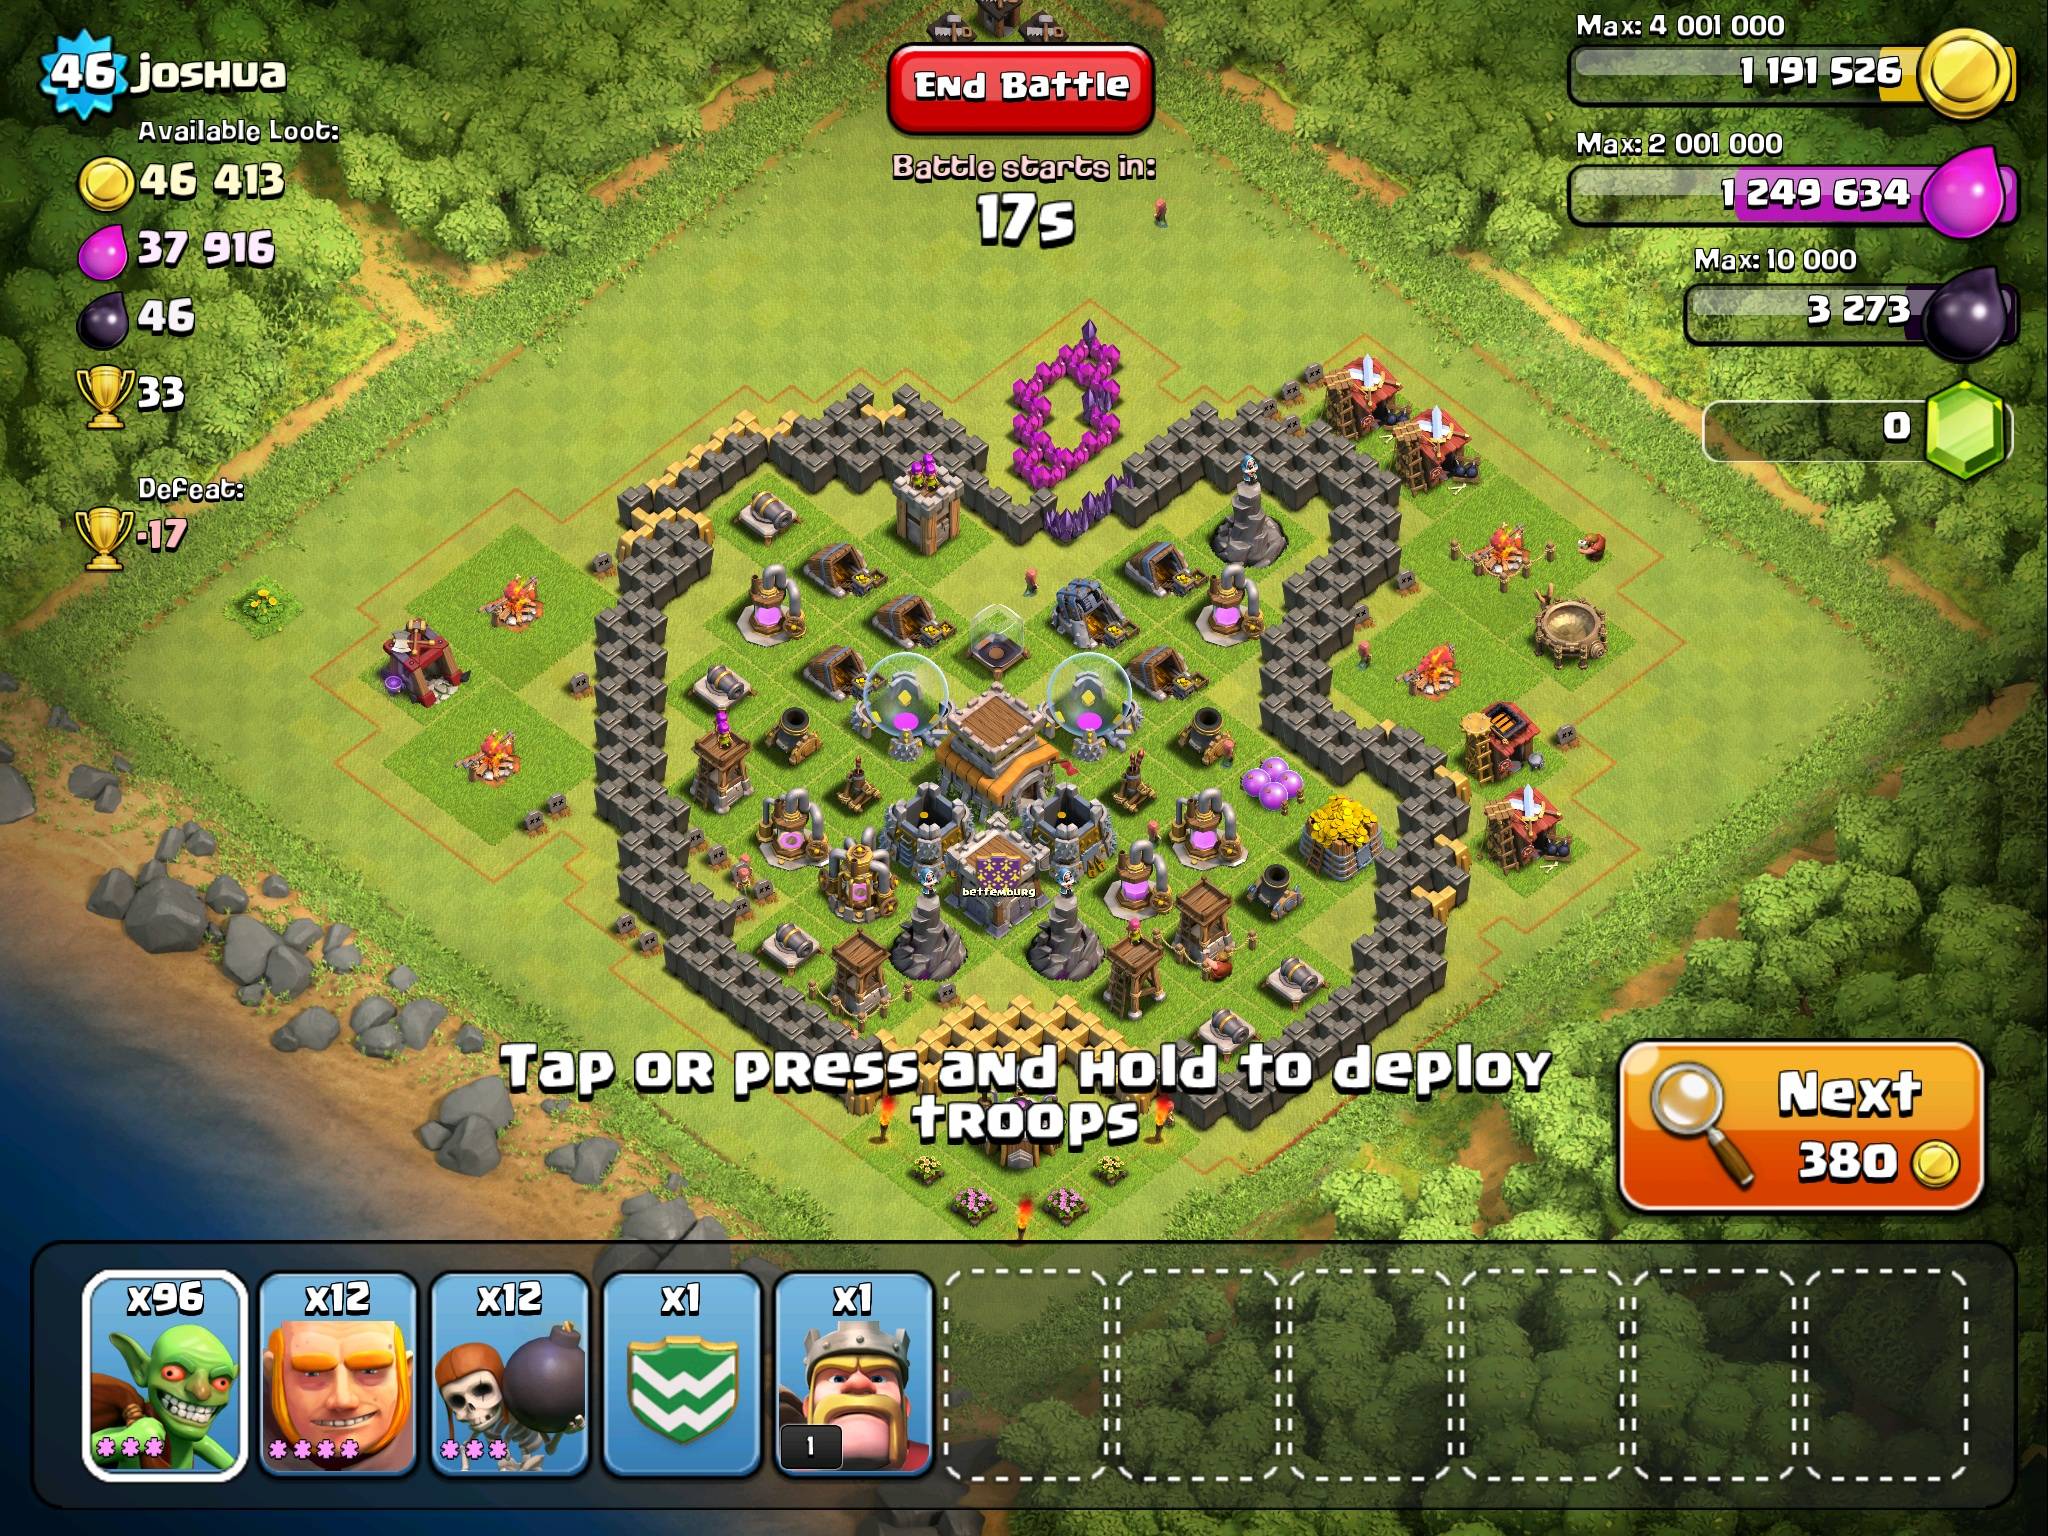 Awesome Clash of Clans (CoC) Base Designs.